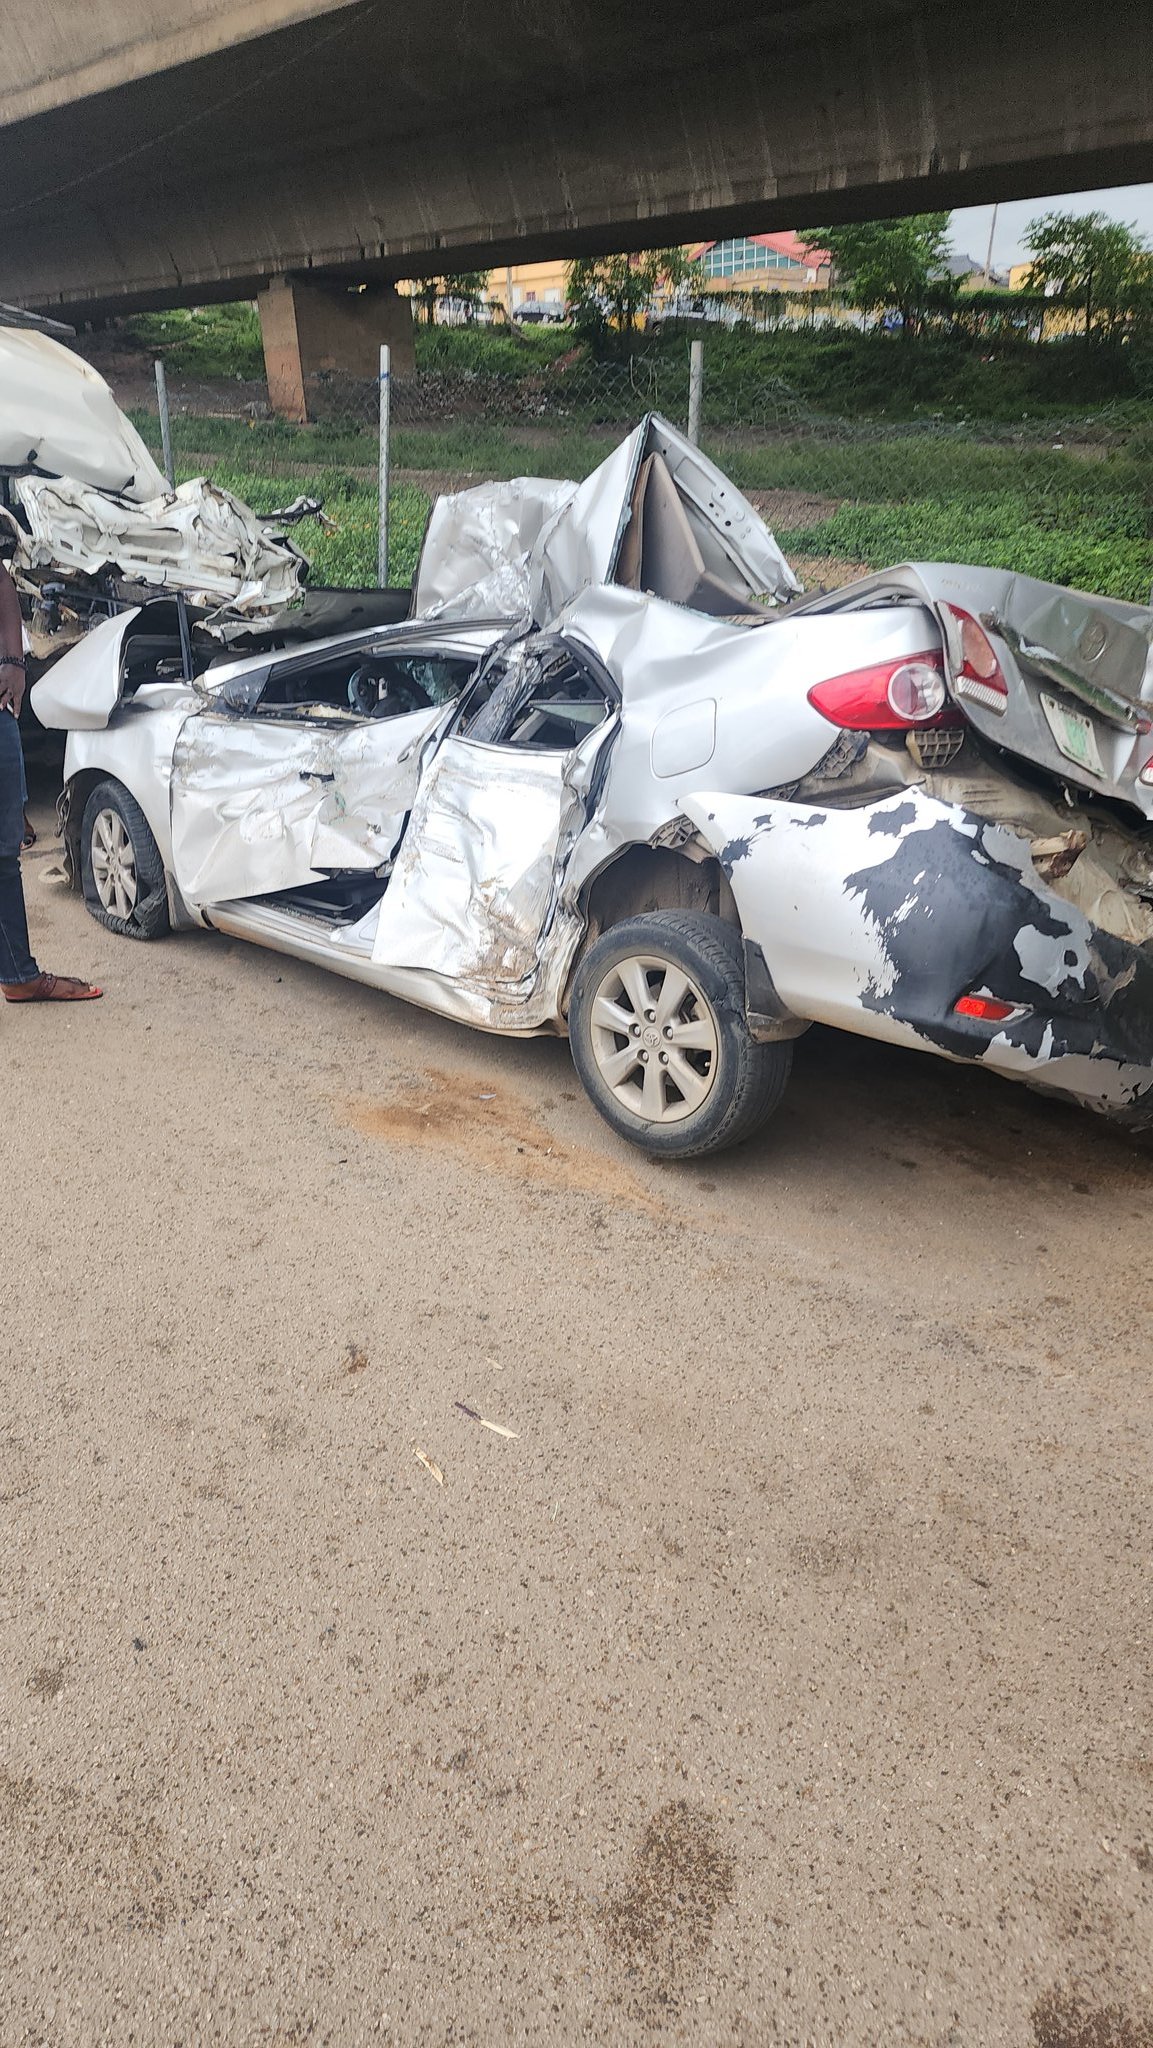 "We got trapped for over an hour after tanker fell on us" Man shows wreckage of car accident he and his wife survived